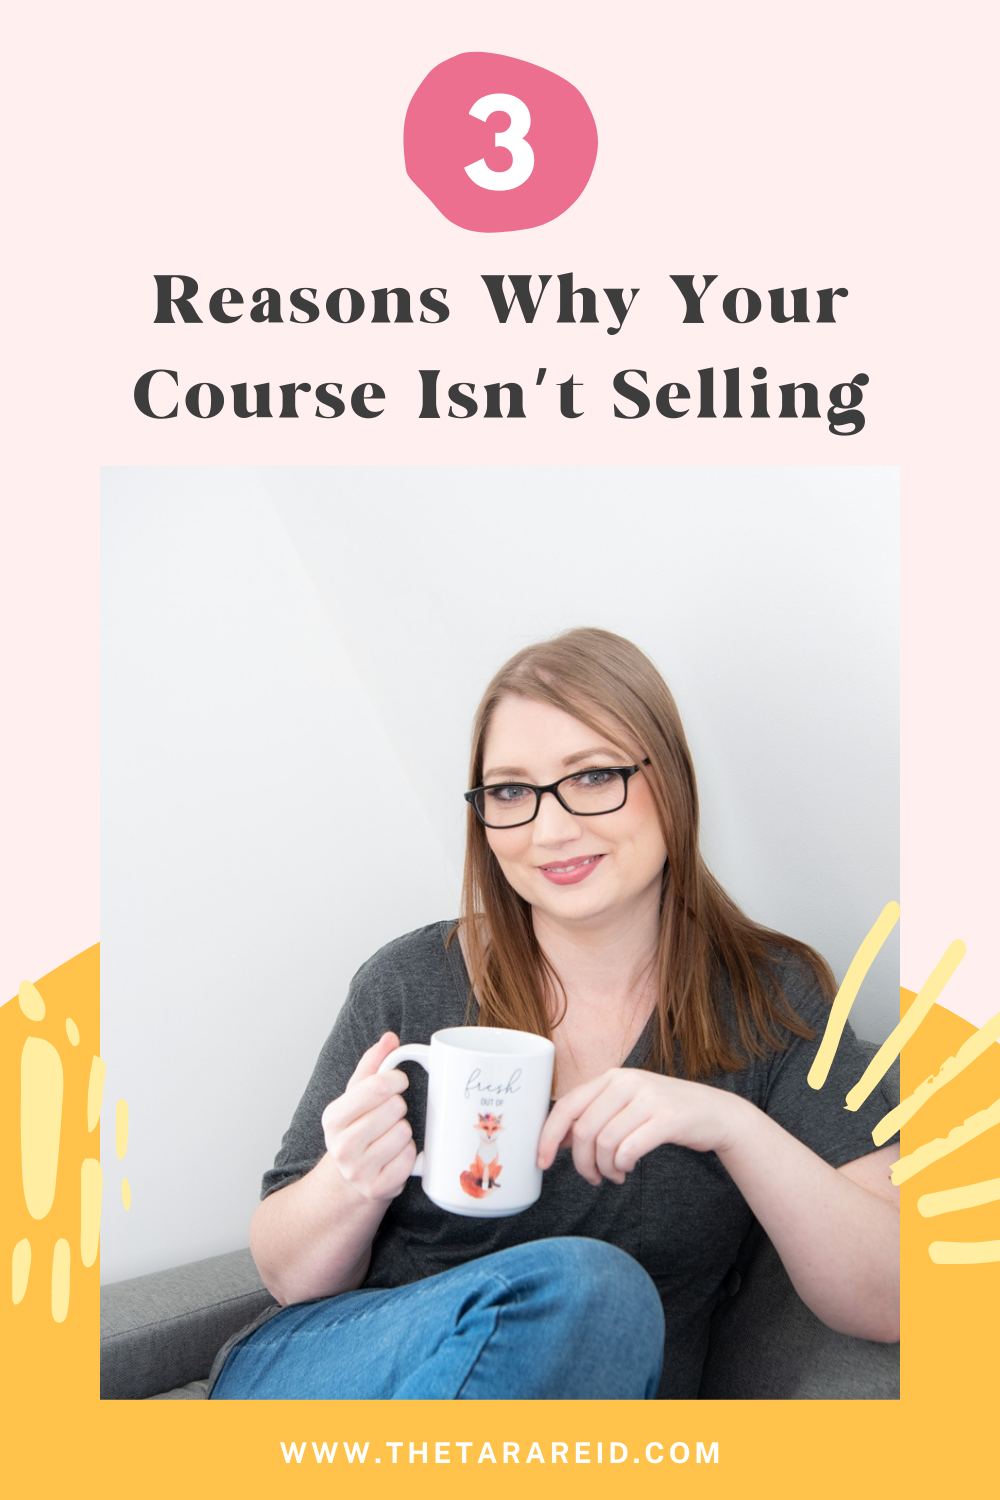 Reasons Why Your Course Isn’t Selling